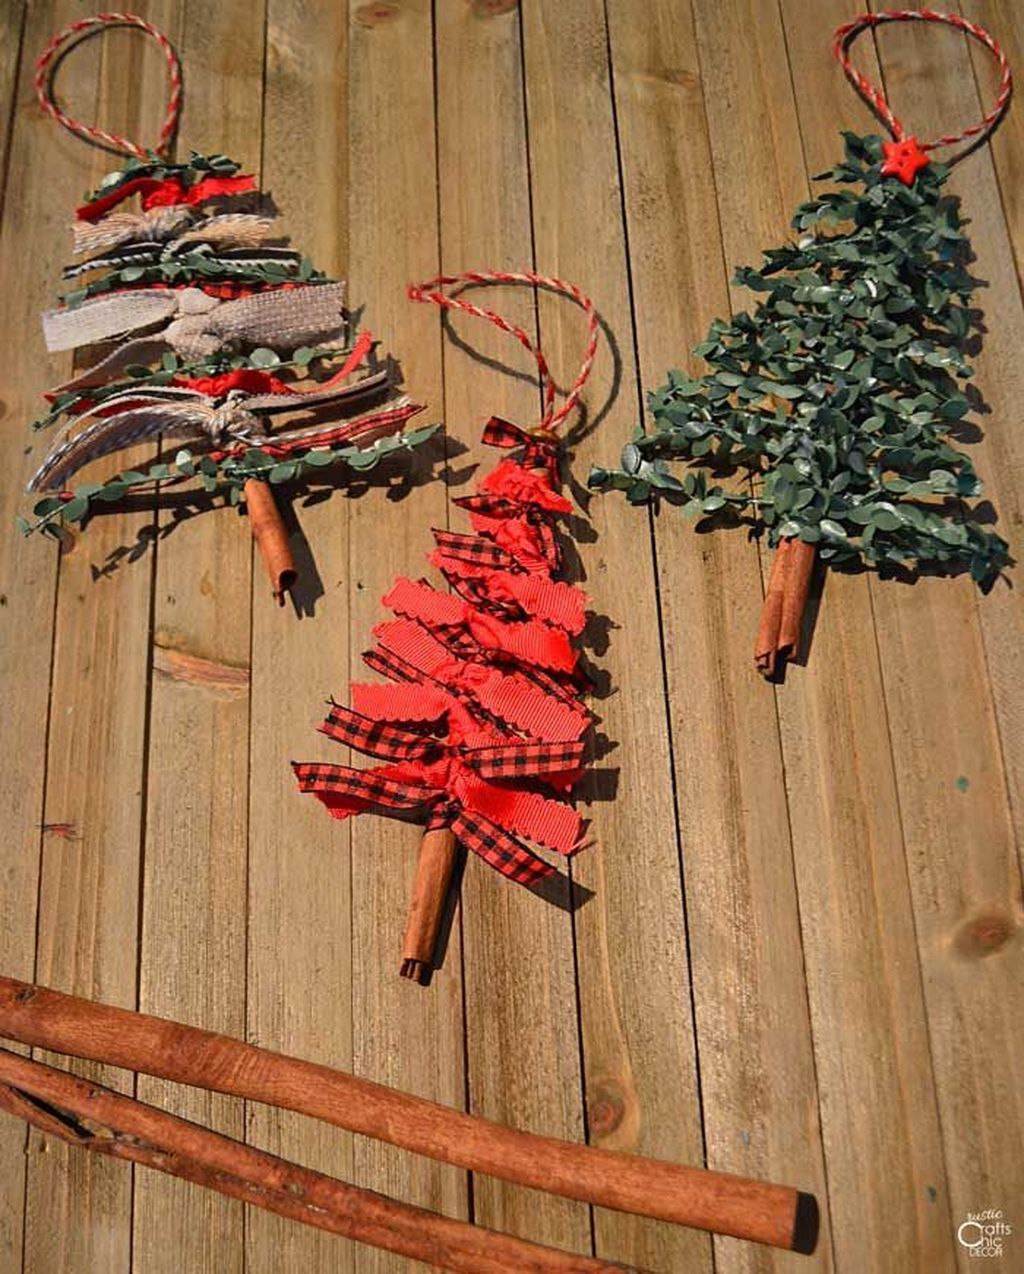 32 Nice Christmas Rustic Ornaments For Home Decoration - MAGZHOUSE